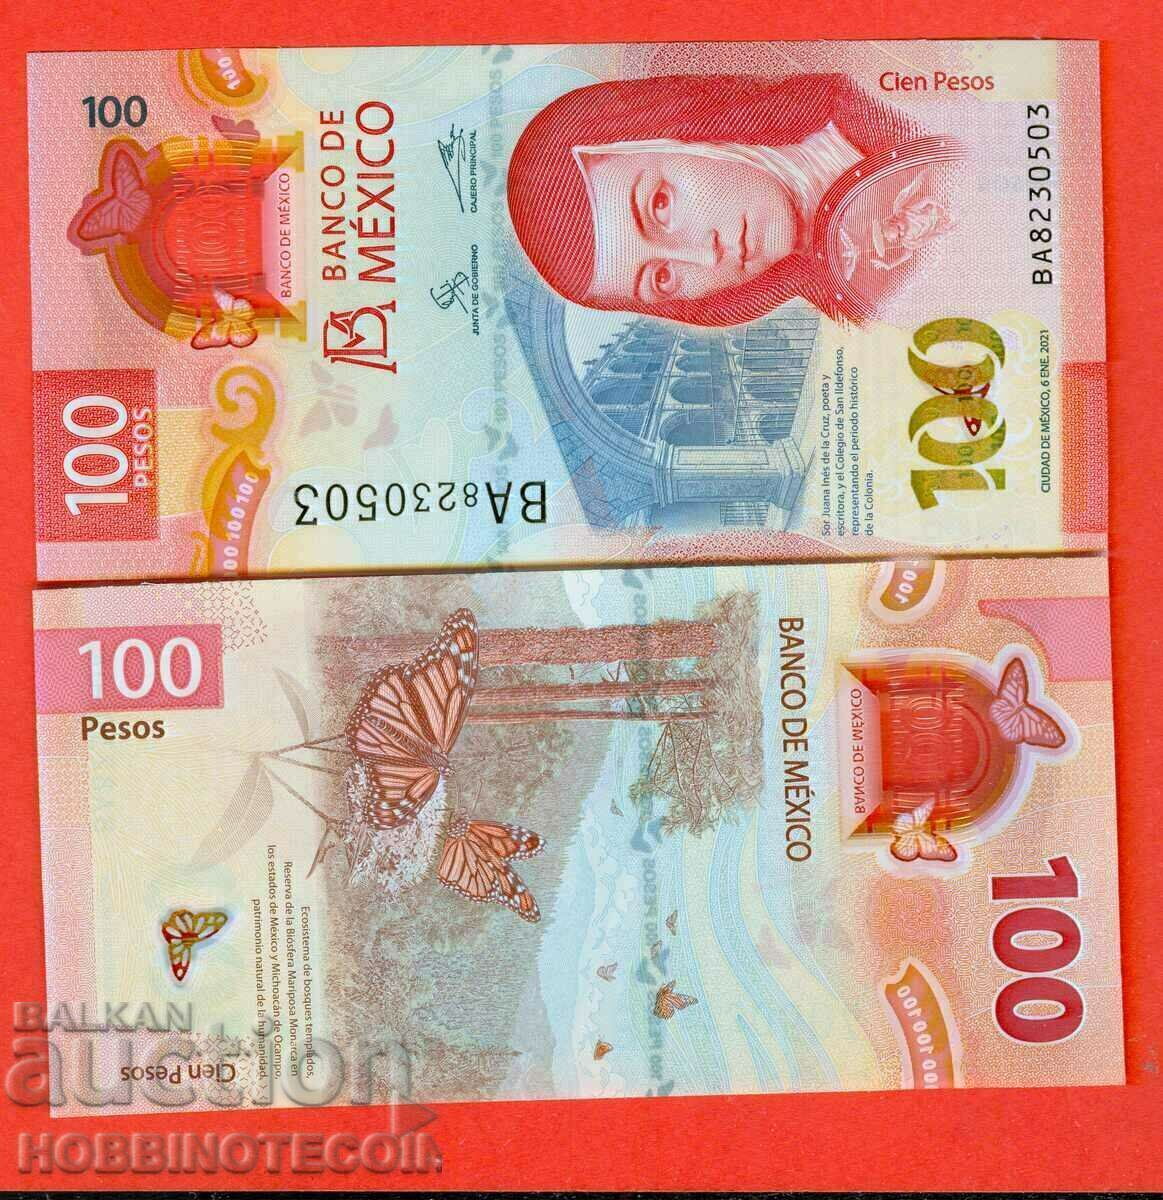 MEXICO MEXICO 100 Peso - issue 2021 NEW UNC POLYMER under 2